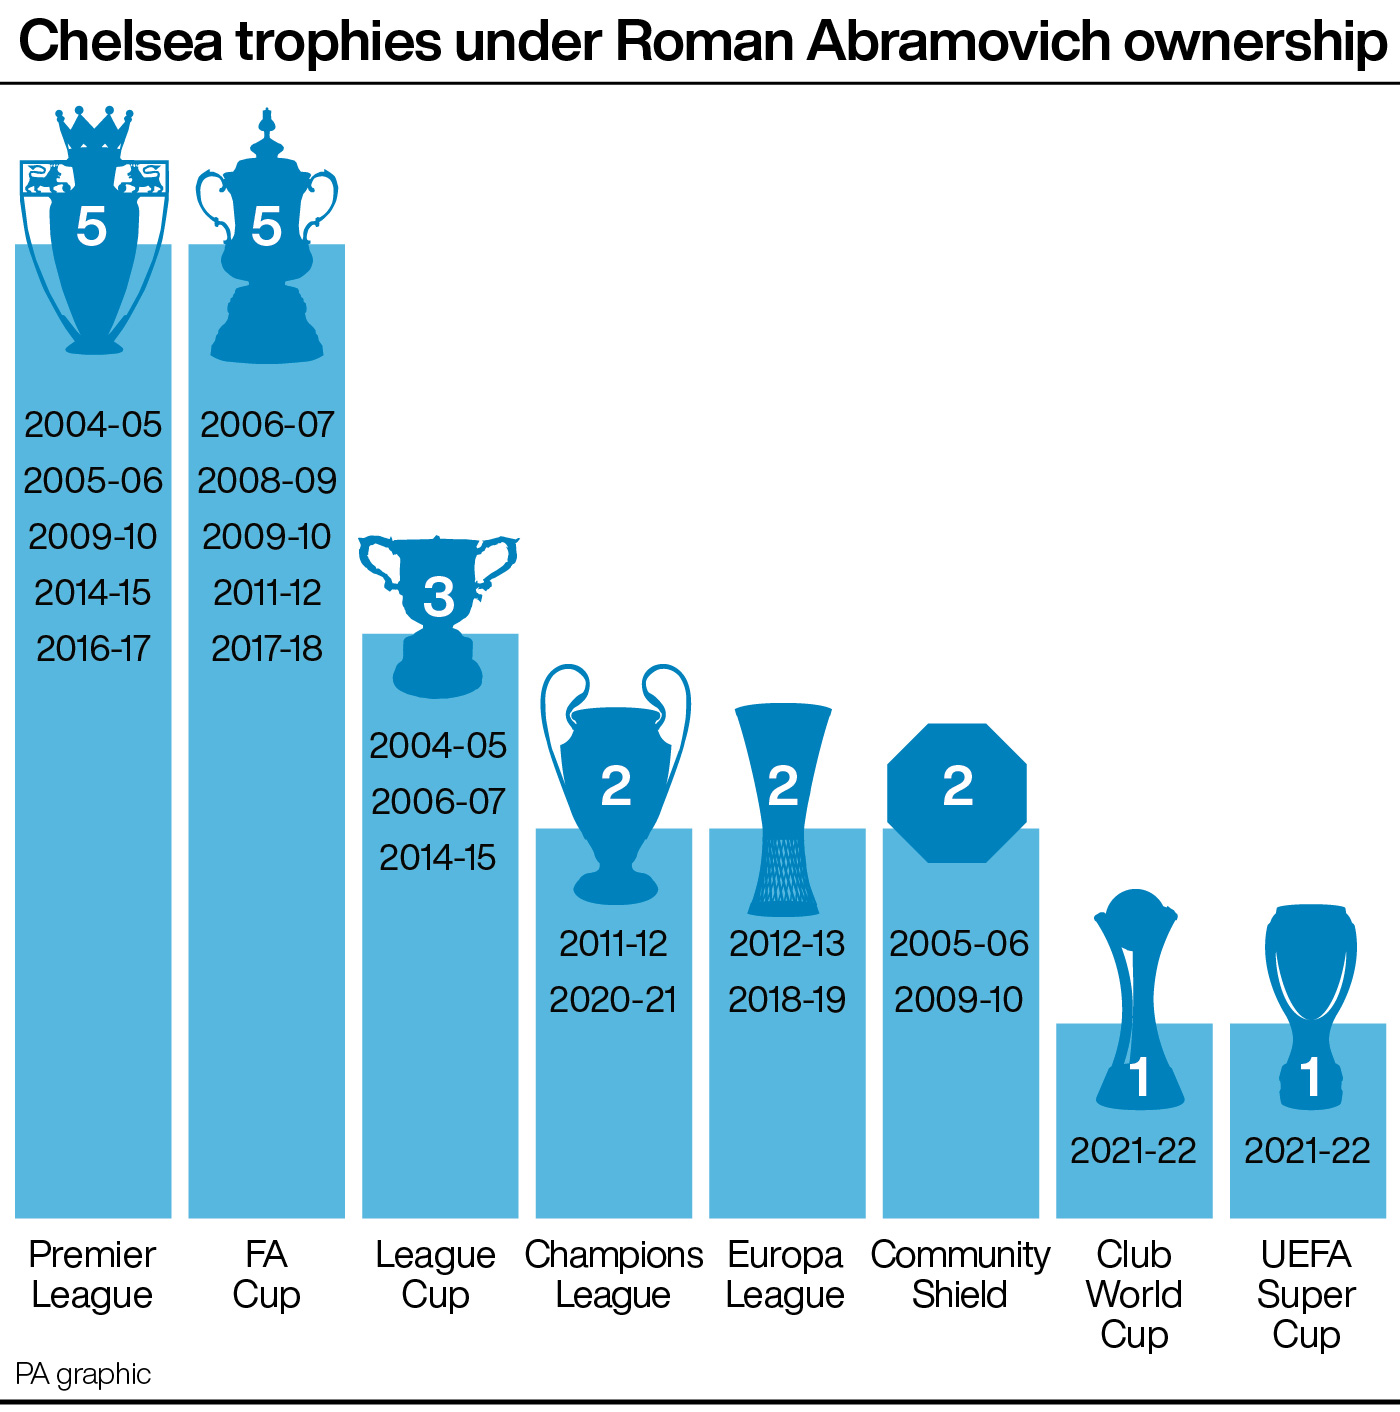 Chelsea trophies under Roman Abramovich ownership